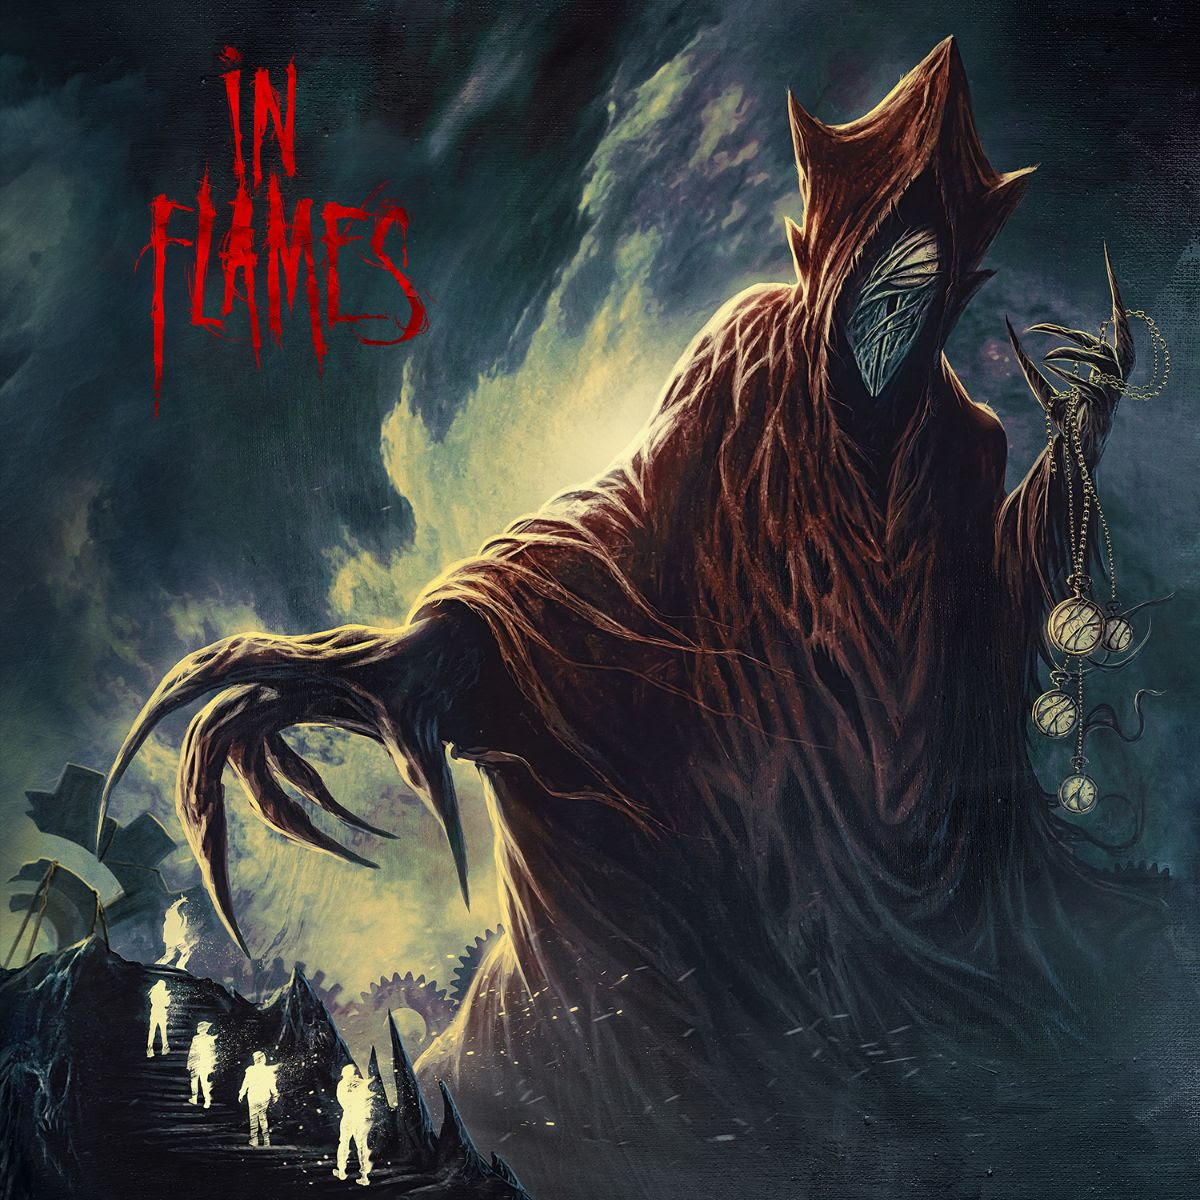 In Flames' New Album "Foregone" Is Out Today + Band Shares Lyric Video For "End The Transmission"